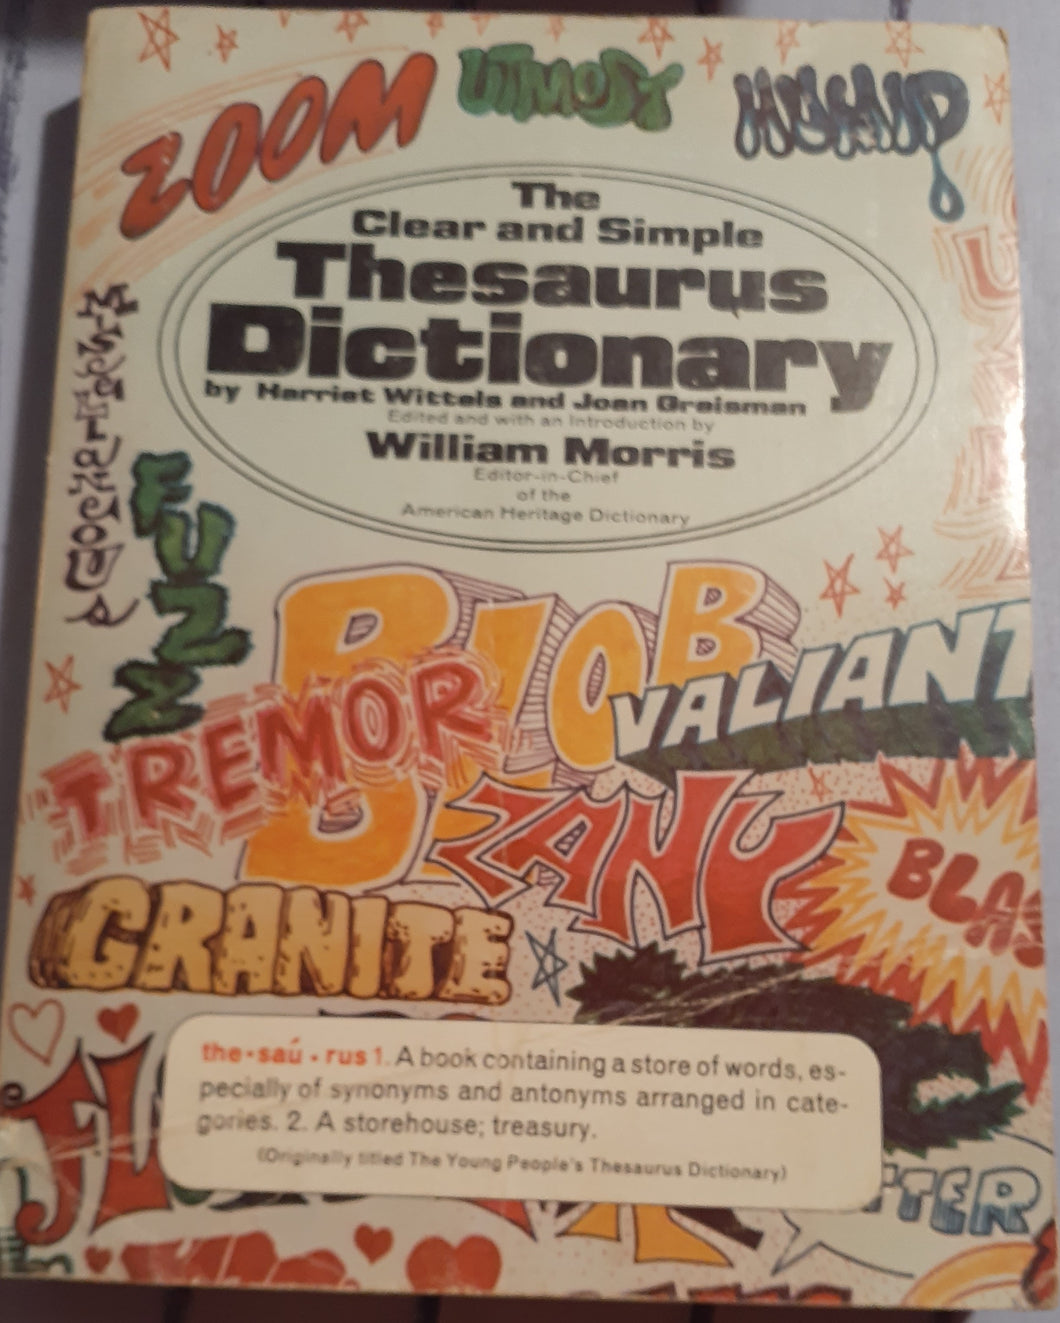 The Clear and Simple Thesaurus Dictionary